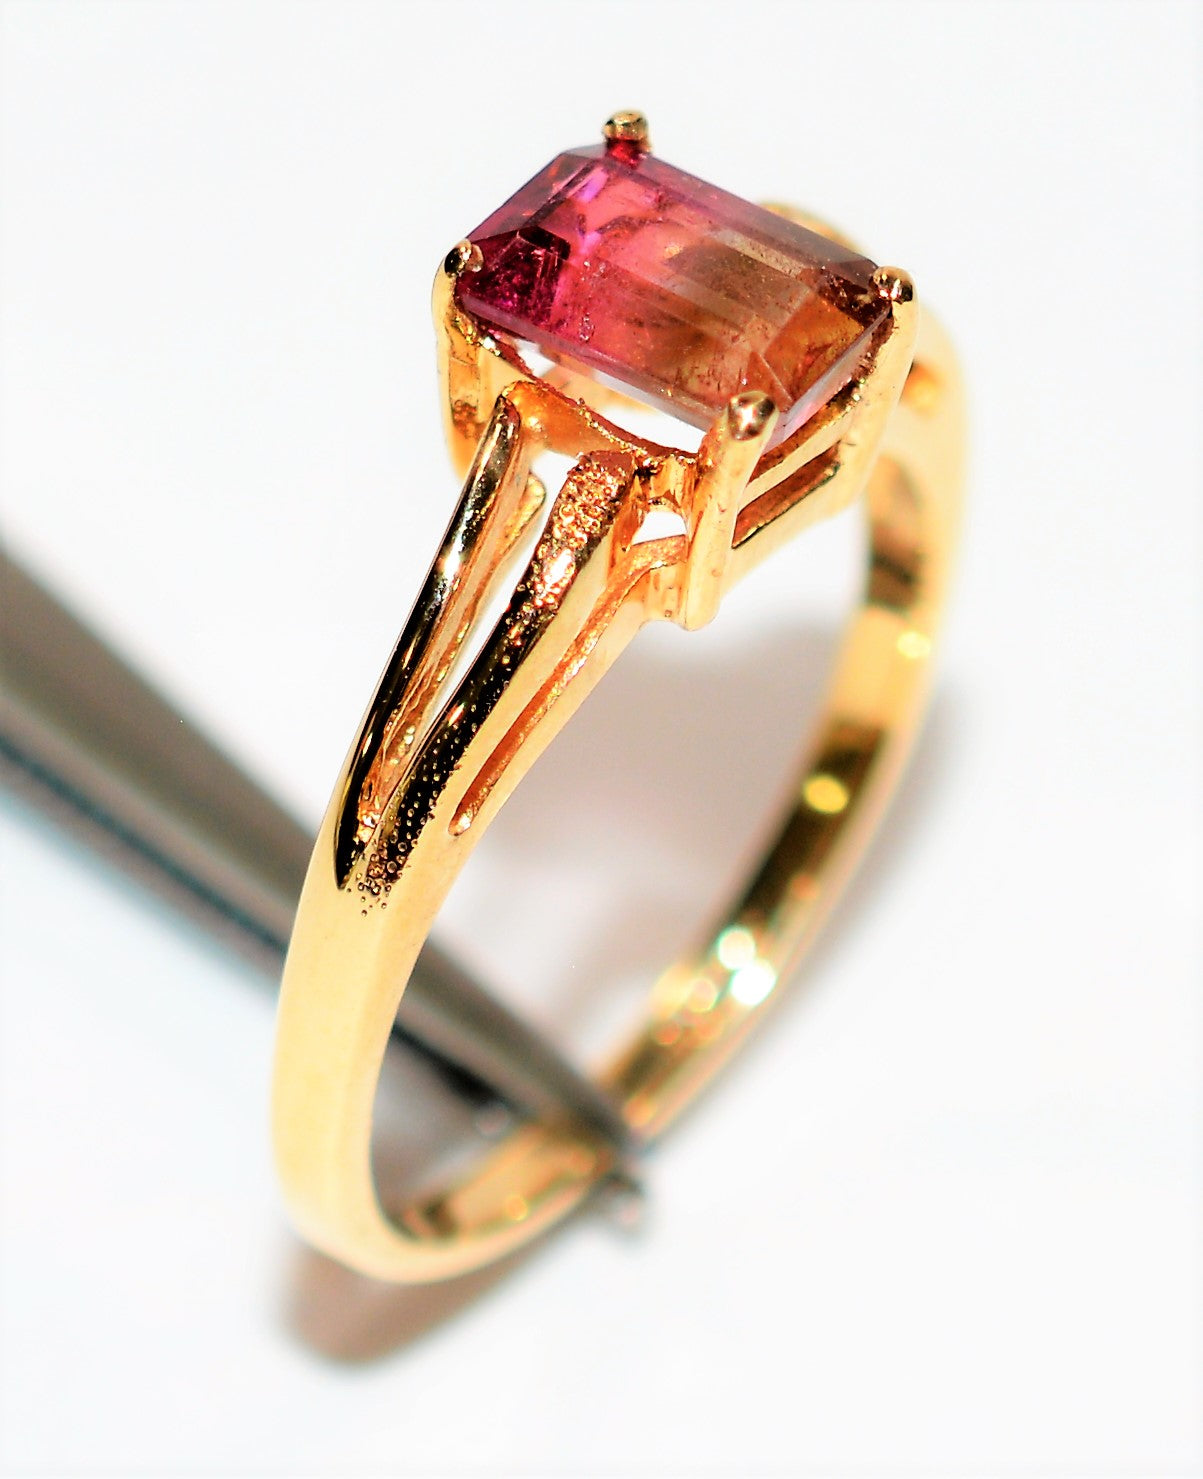 Natural Watermelon Tourmaline Ring 10K Solid Gold 1.09ct Gemstone Ring Solitaire Ring Ladies Ring Birthstone Ring Anniversary Ring Jewellery